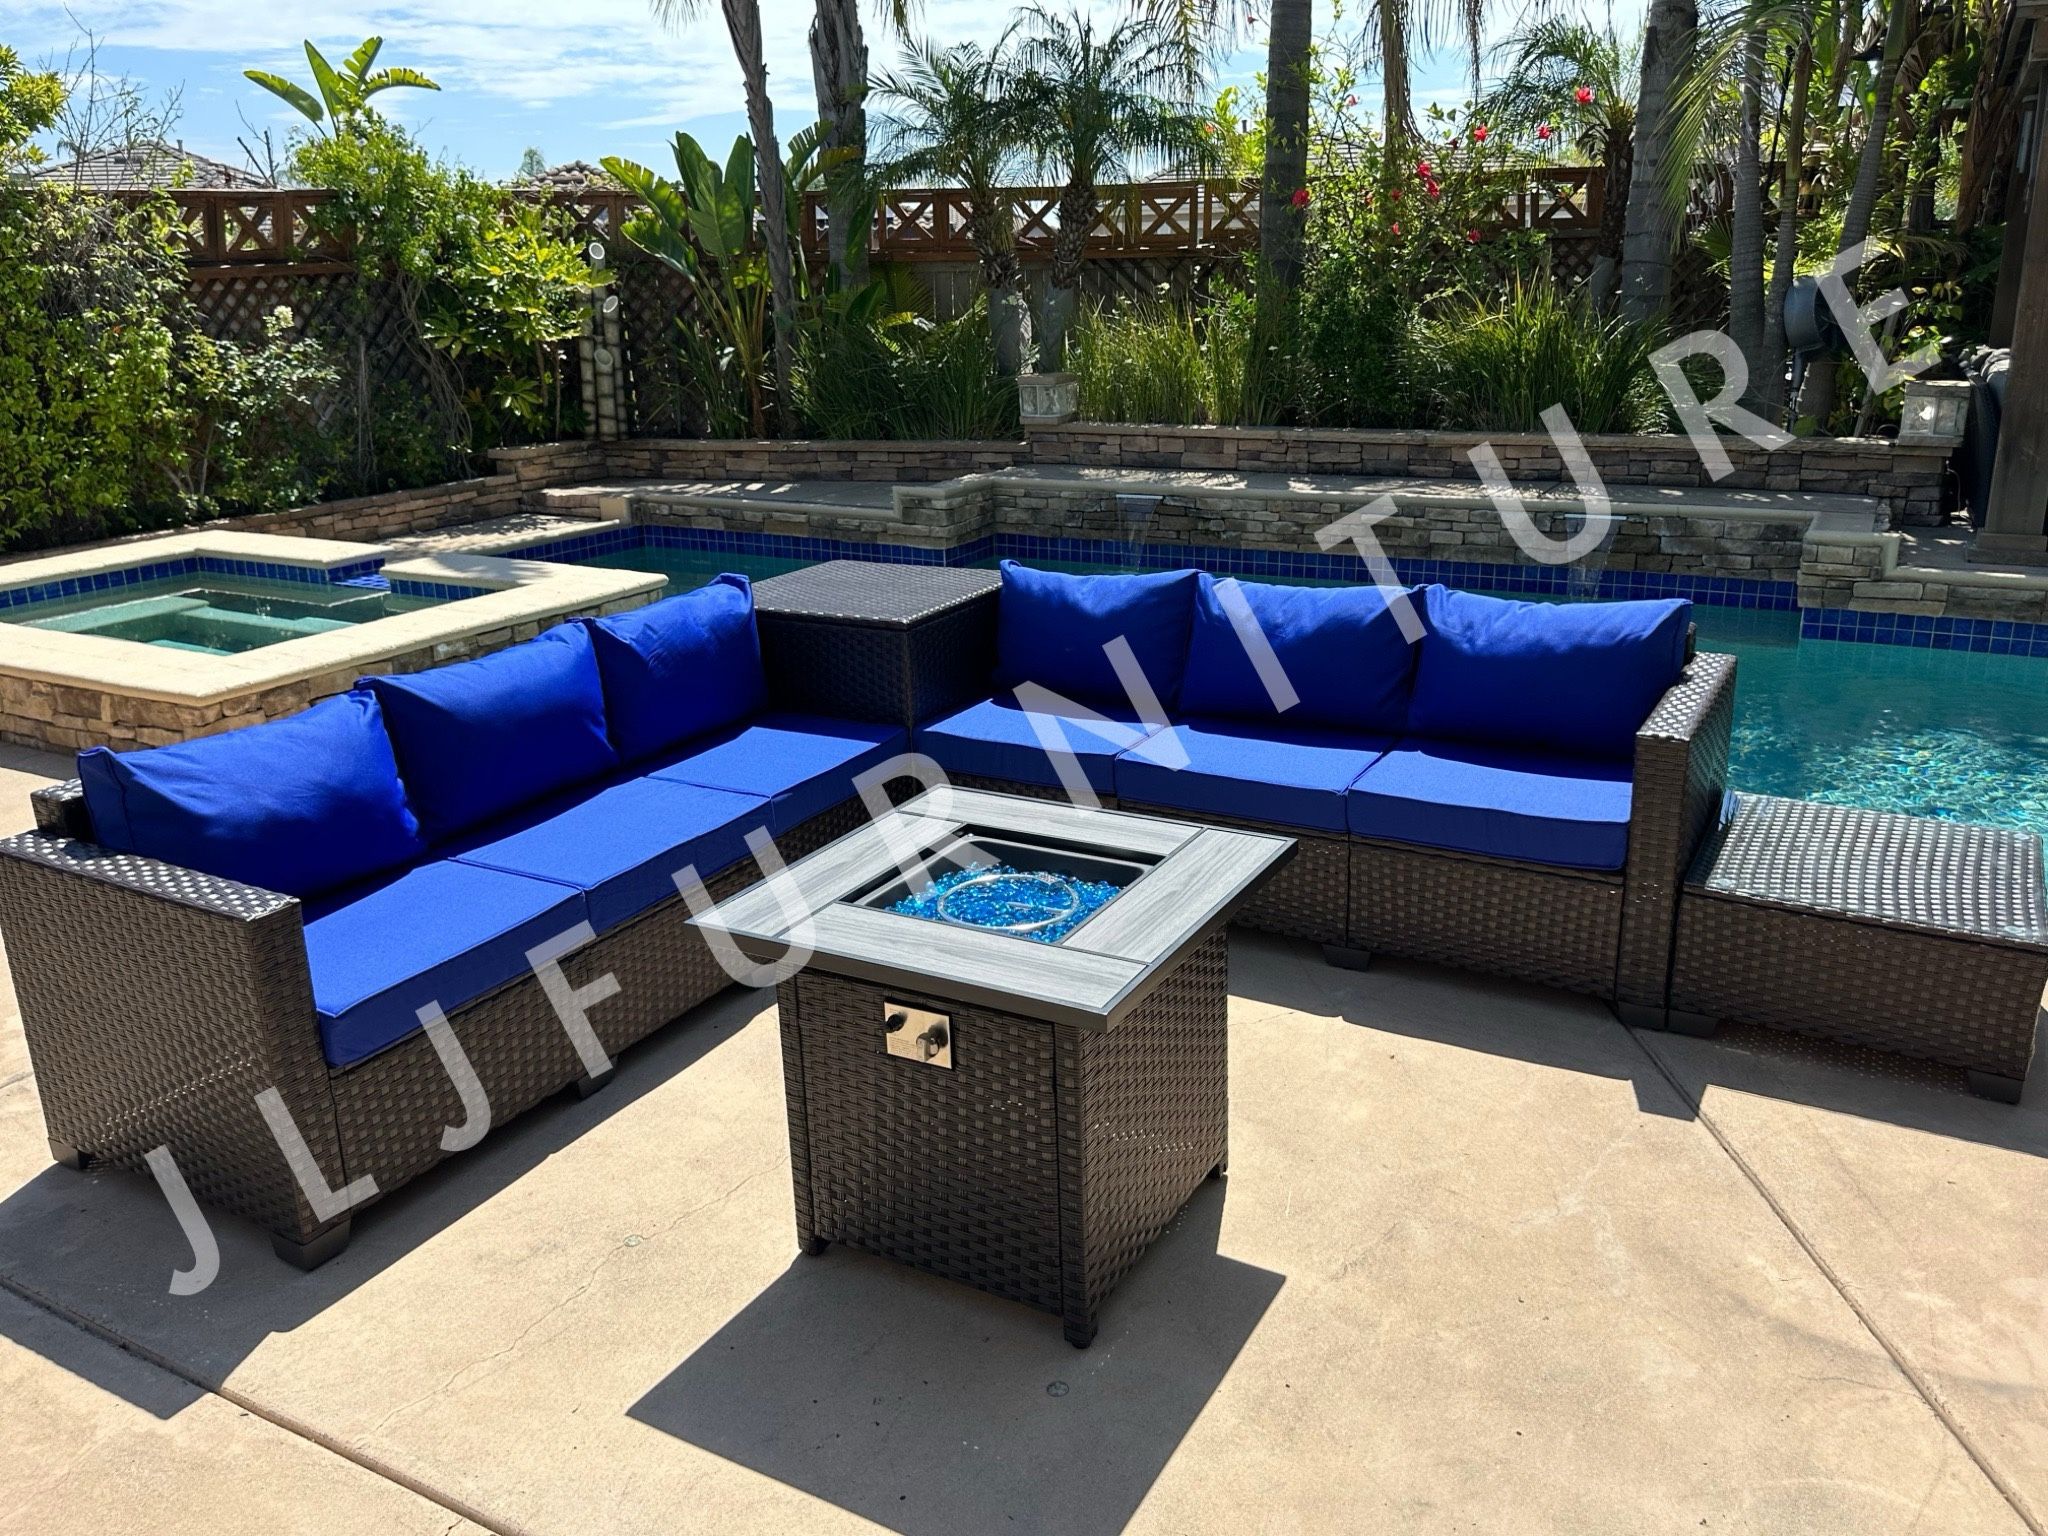 Brand NEW🔥 Patio Furniture Set Outdoor Brown Wicker Royal Blue Cushions with 30" Firepit ASSEMBLED